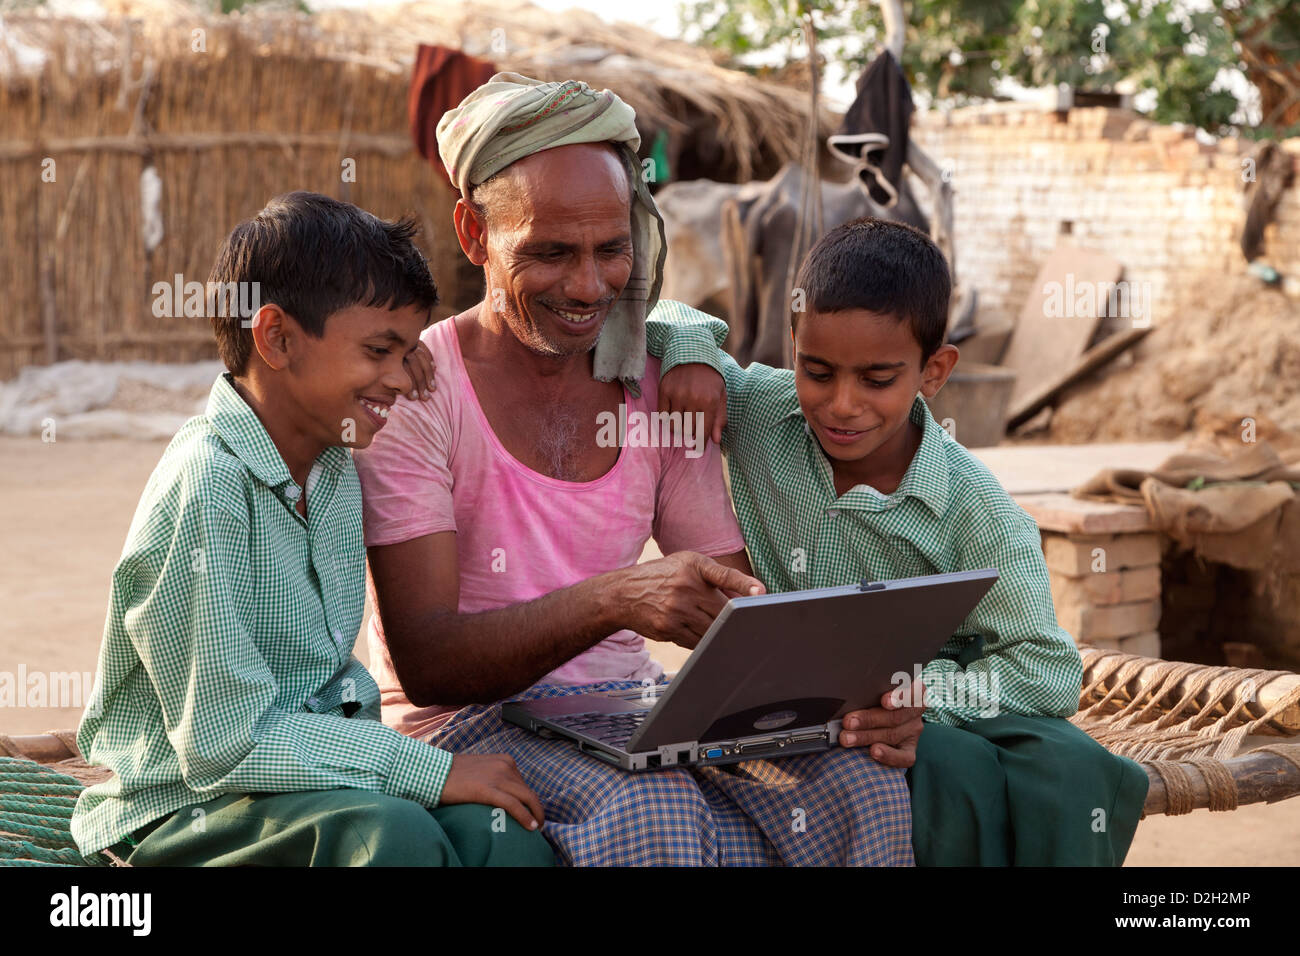 India,Uttar Pradesh, Agra, Two young children in school uniform studying laptop with father. Stock Photo